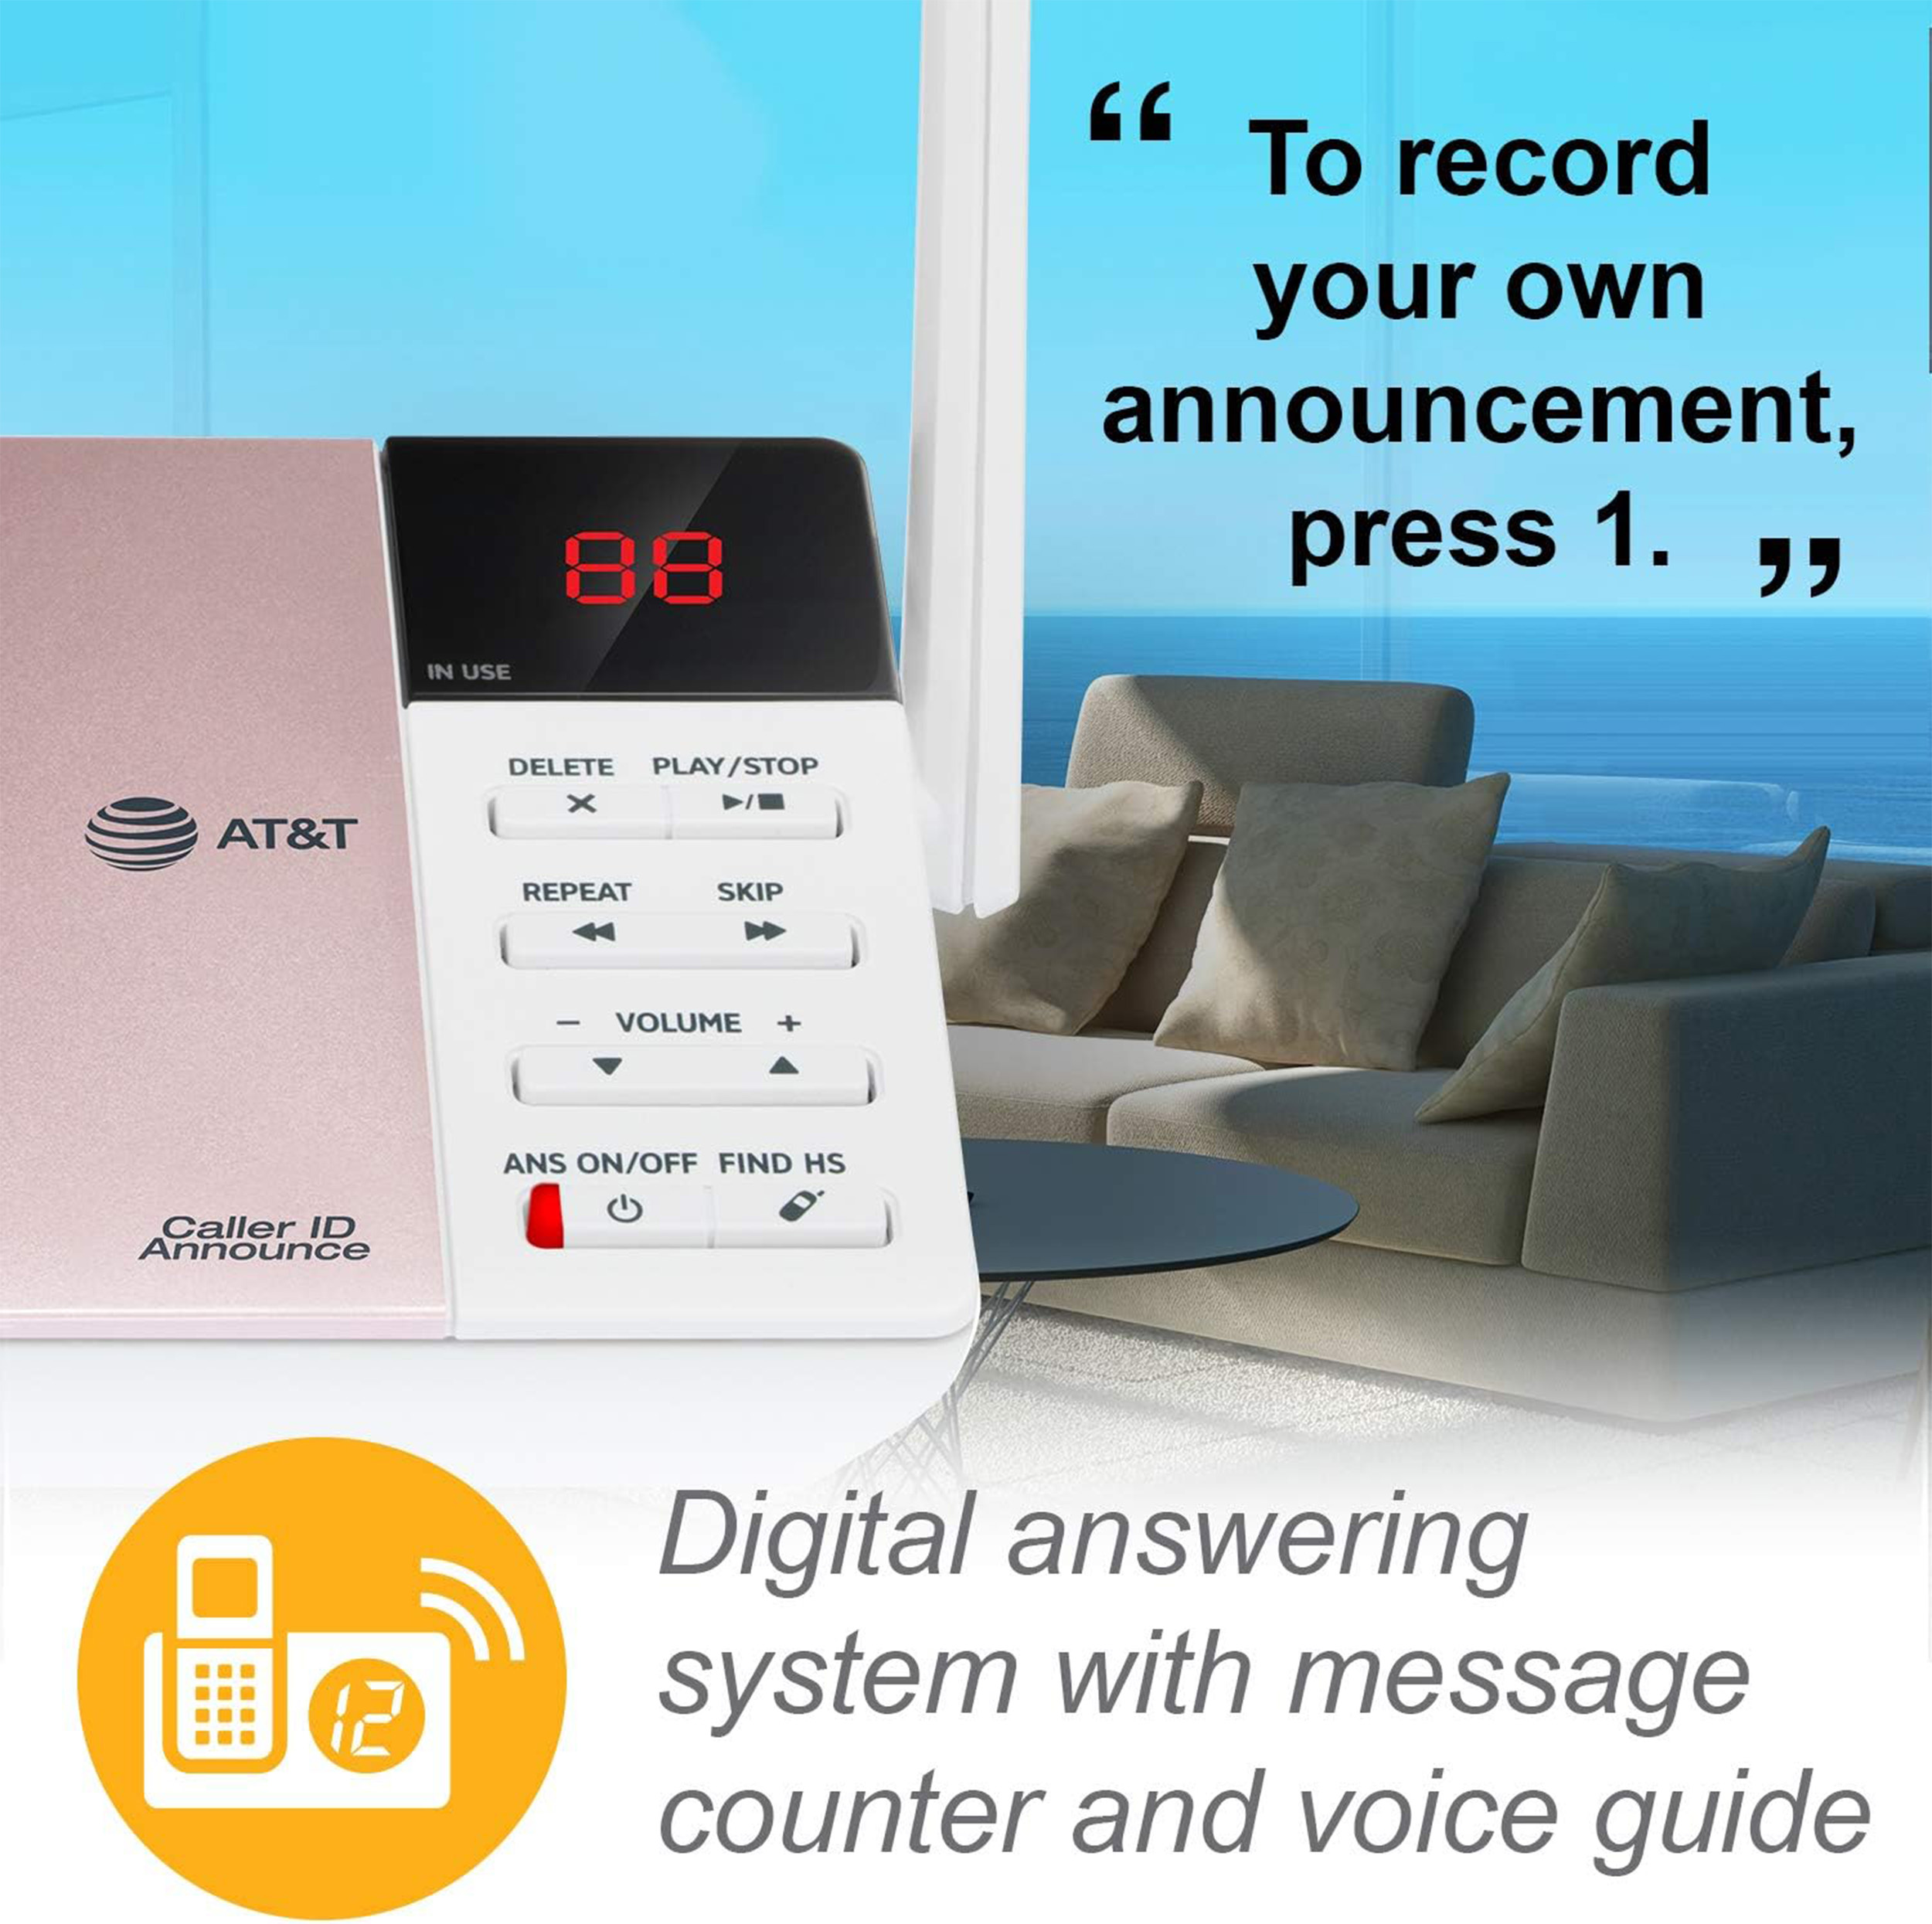 5 handset cordless answering system with smart call blocker - view 5